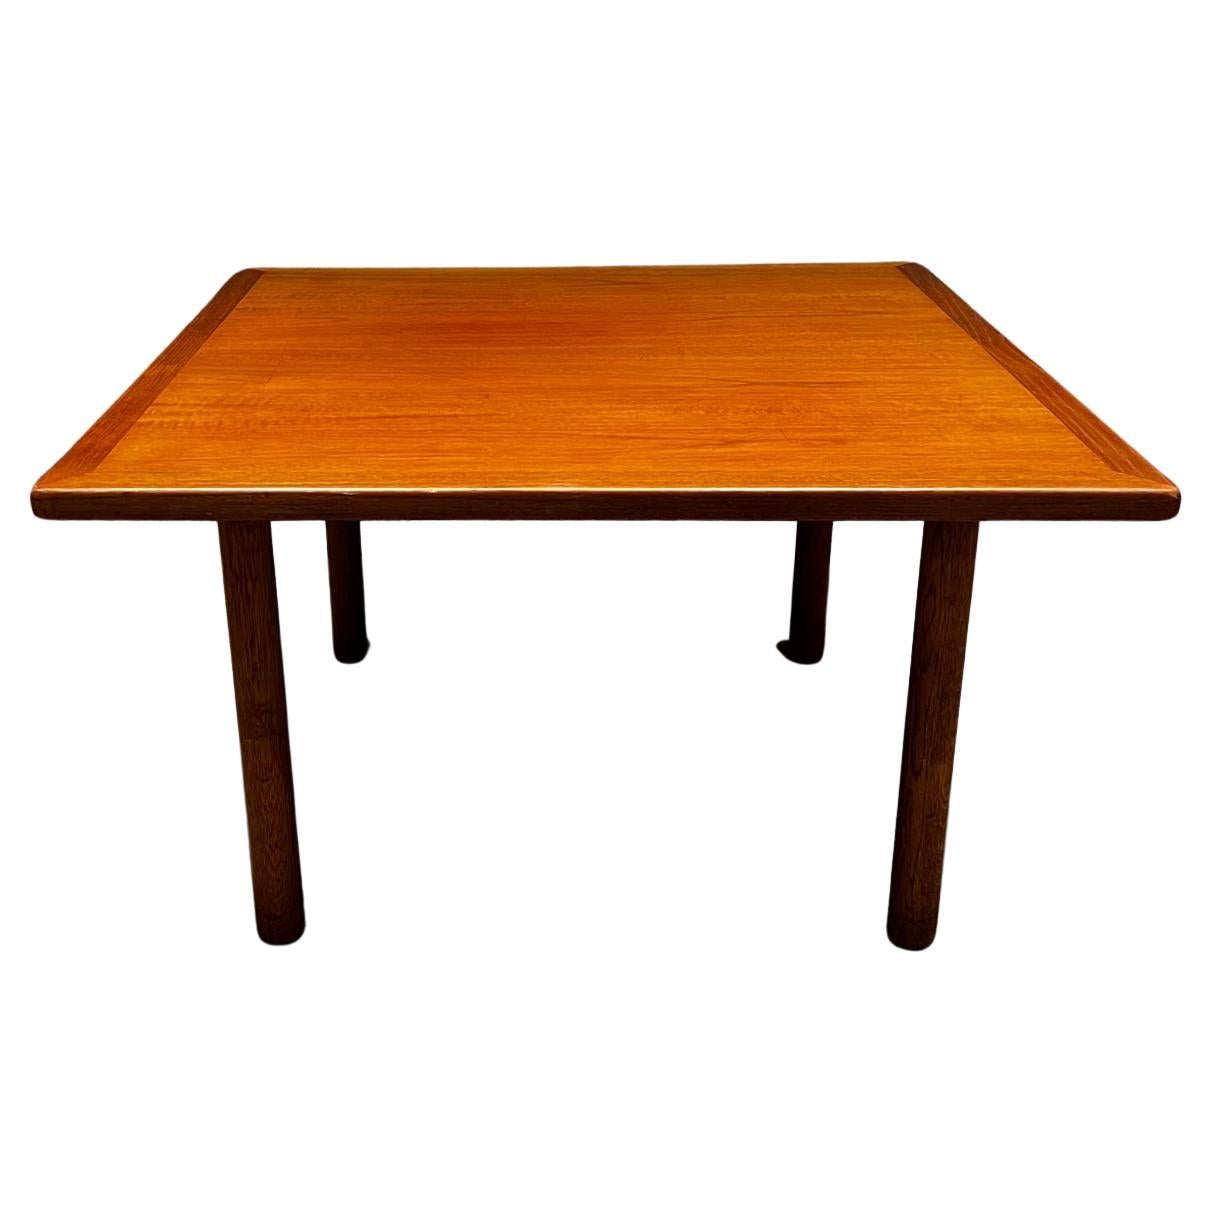 1960s Danish Modern Coffee Table Denmark
In the style of Hans Wegner
features teak tabletop on oak legs.
Unmarked.
Legs can be removed.
19 h x 33.5 x 33.5
Original preowned vintage condition.
Refer to images provided.